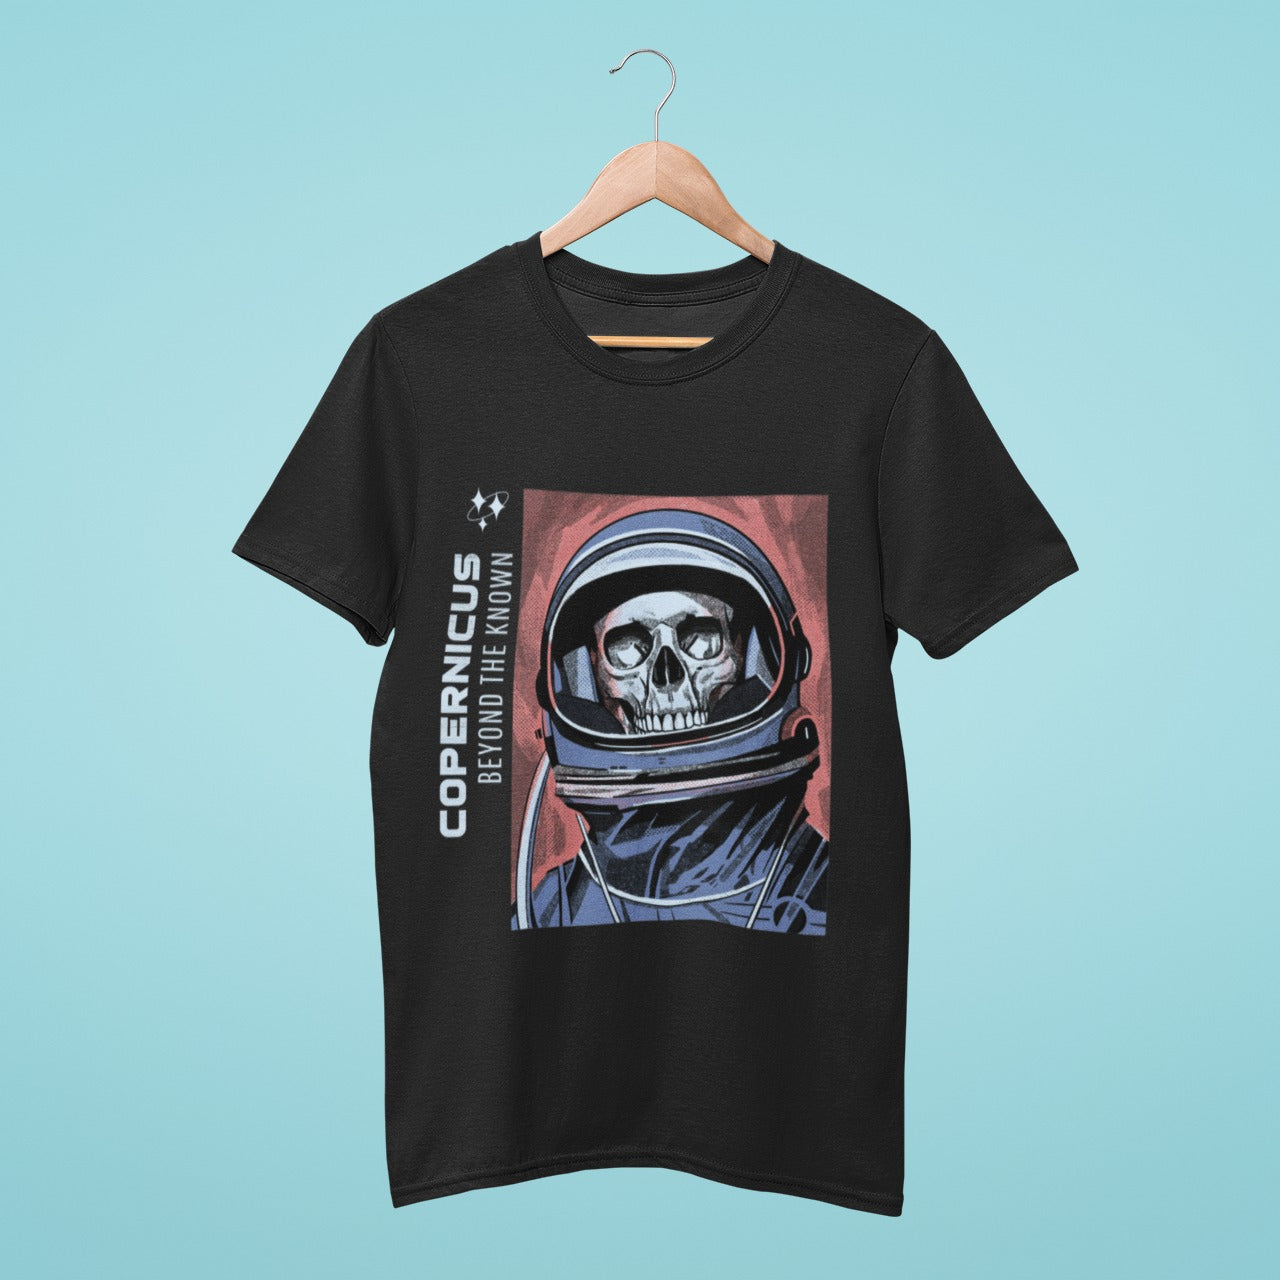 Unleash your inner explorer with our black t-shirt featuring a skull in an astronaut helmet and the phrase "Copernicus Beyond the Unknown" written on the side. Perfect for space enthusiasts, this high-quality t-shirt is great for casual outings or as a gift. Add some edge to your wardrobe with this unique and creative design, and order now!